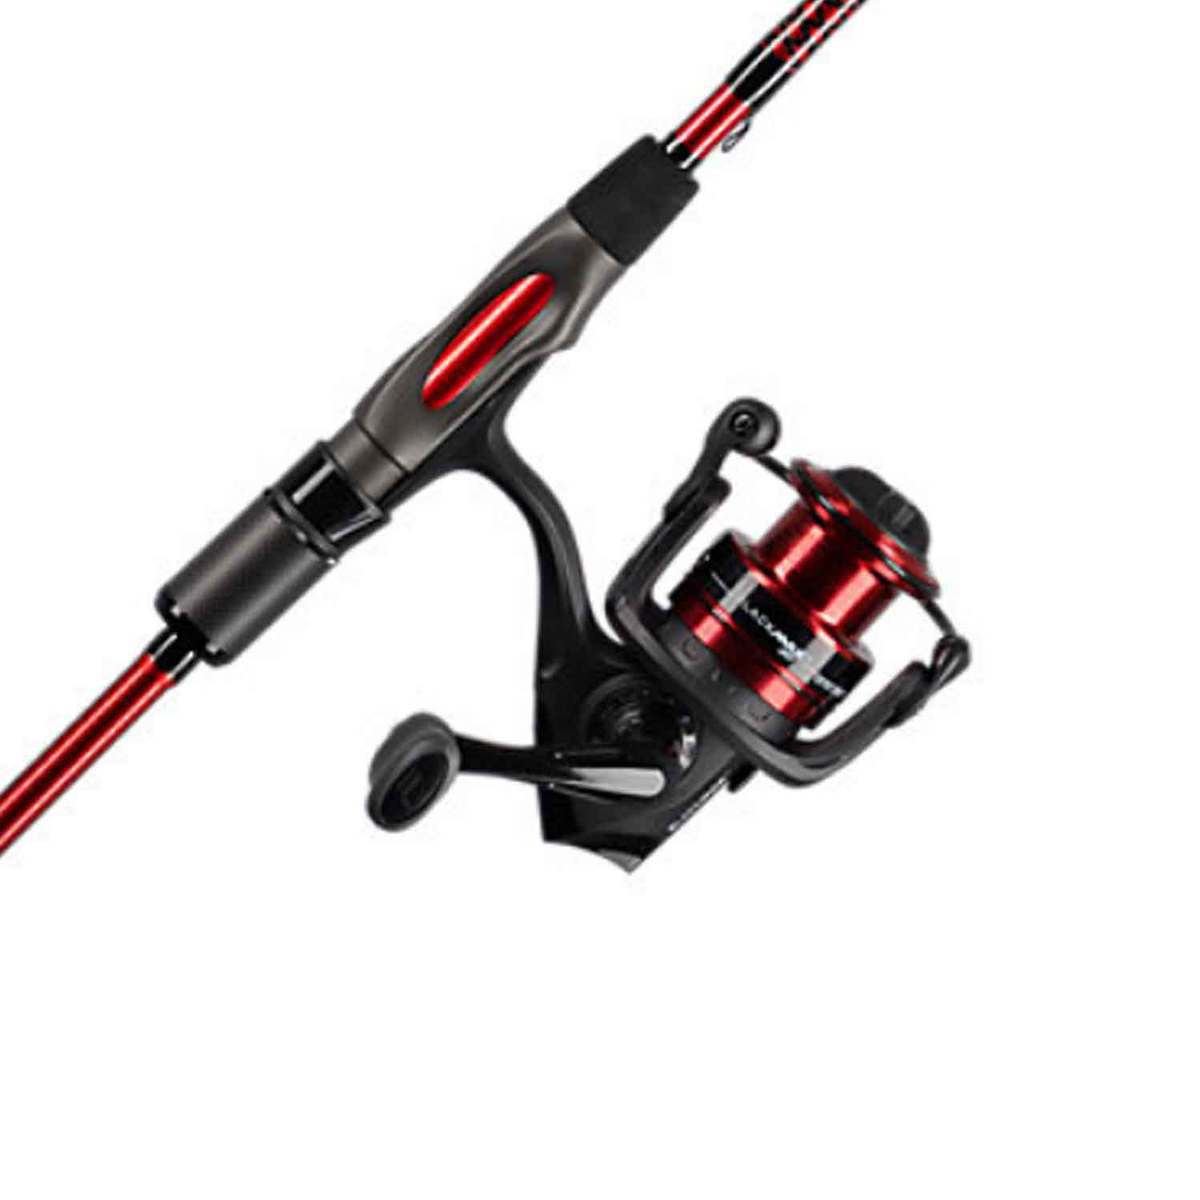  Customer reviews: PENN Fierce IV Spinning Reel and Fishing Rod  Combo, Black/Red